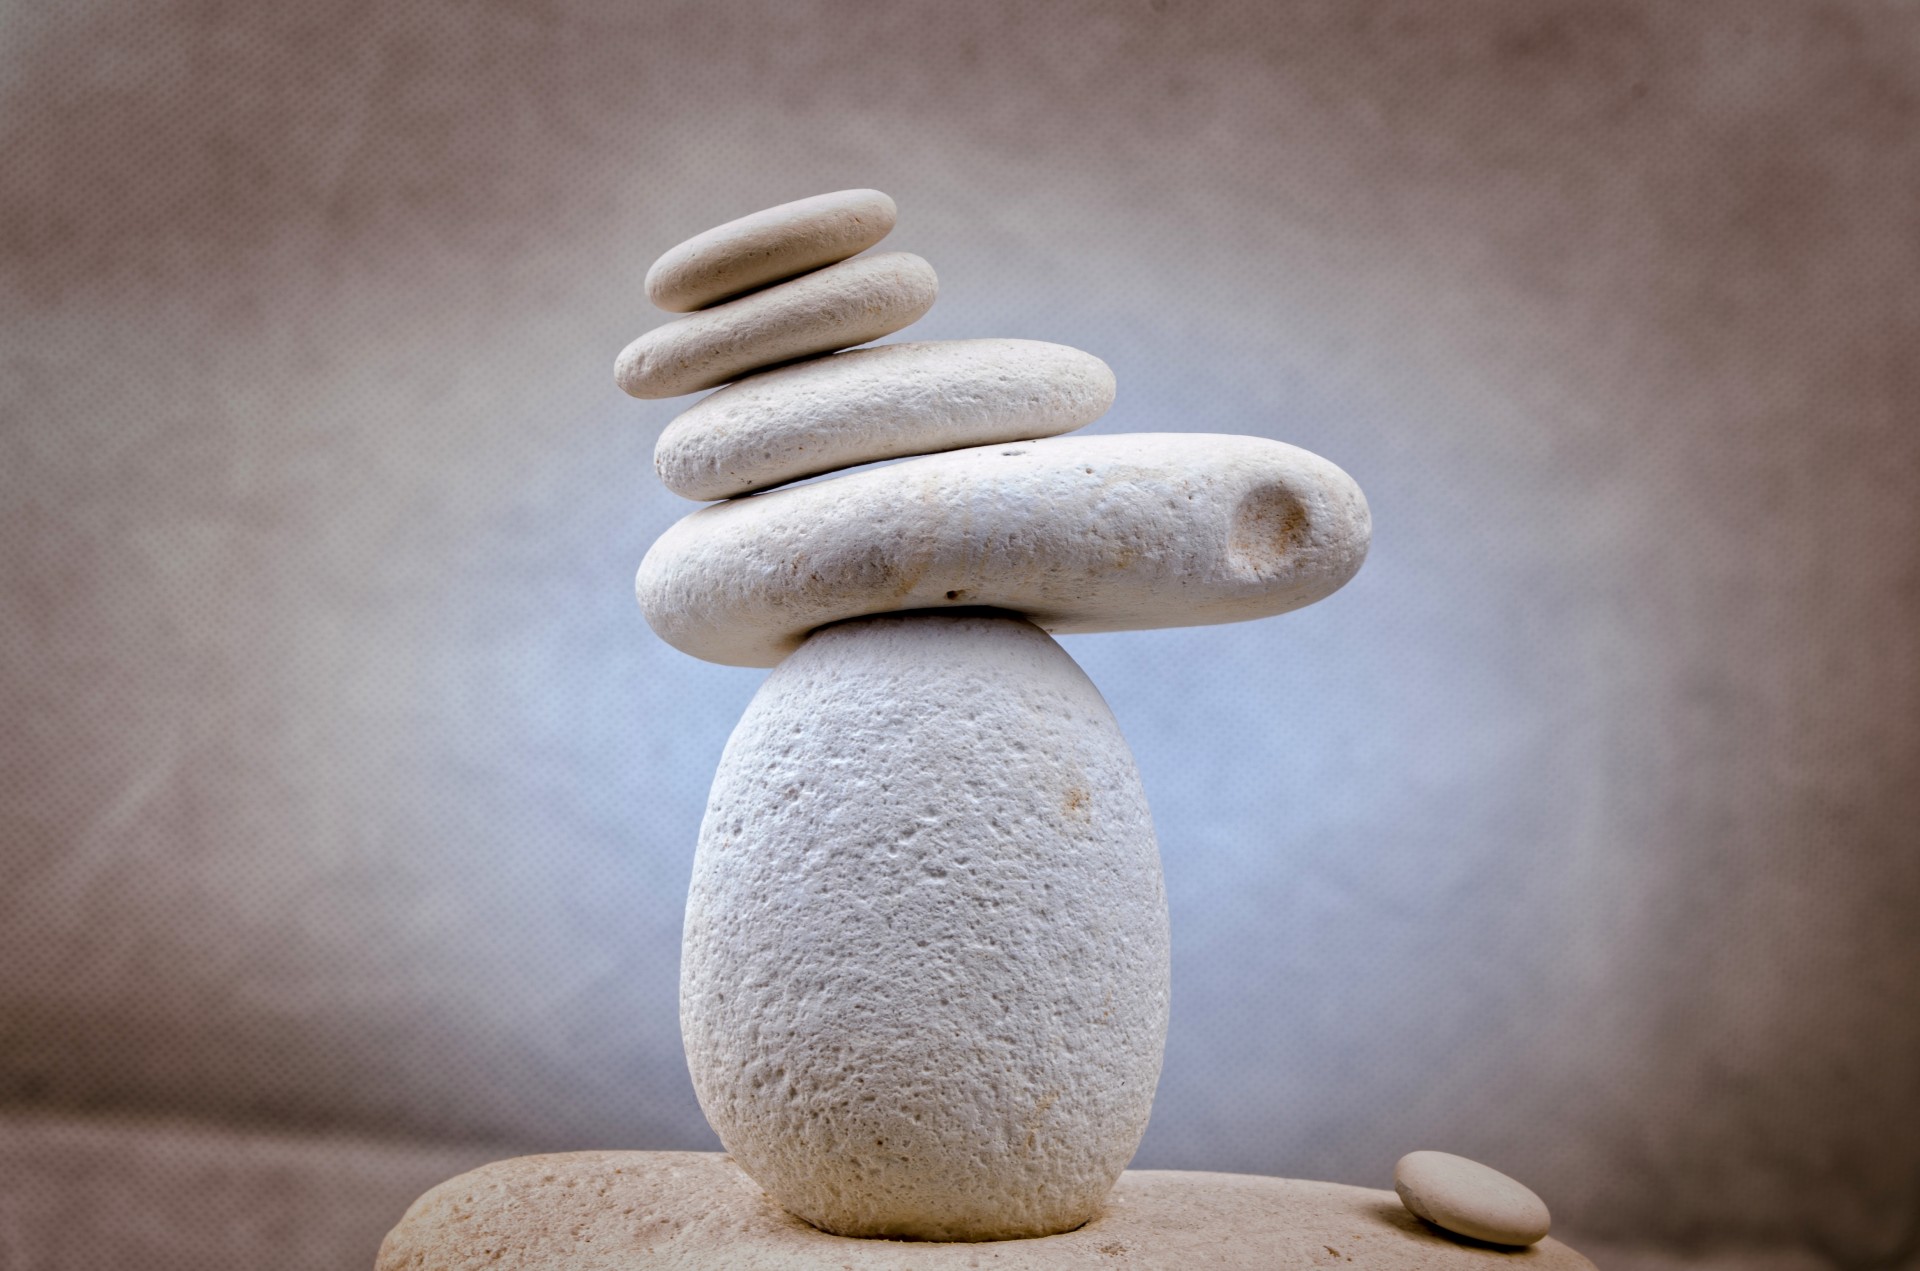 A large stone balancing different sizes of stones